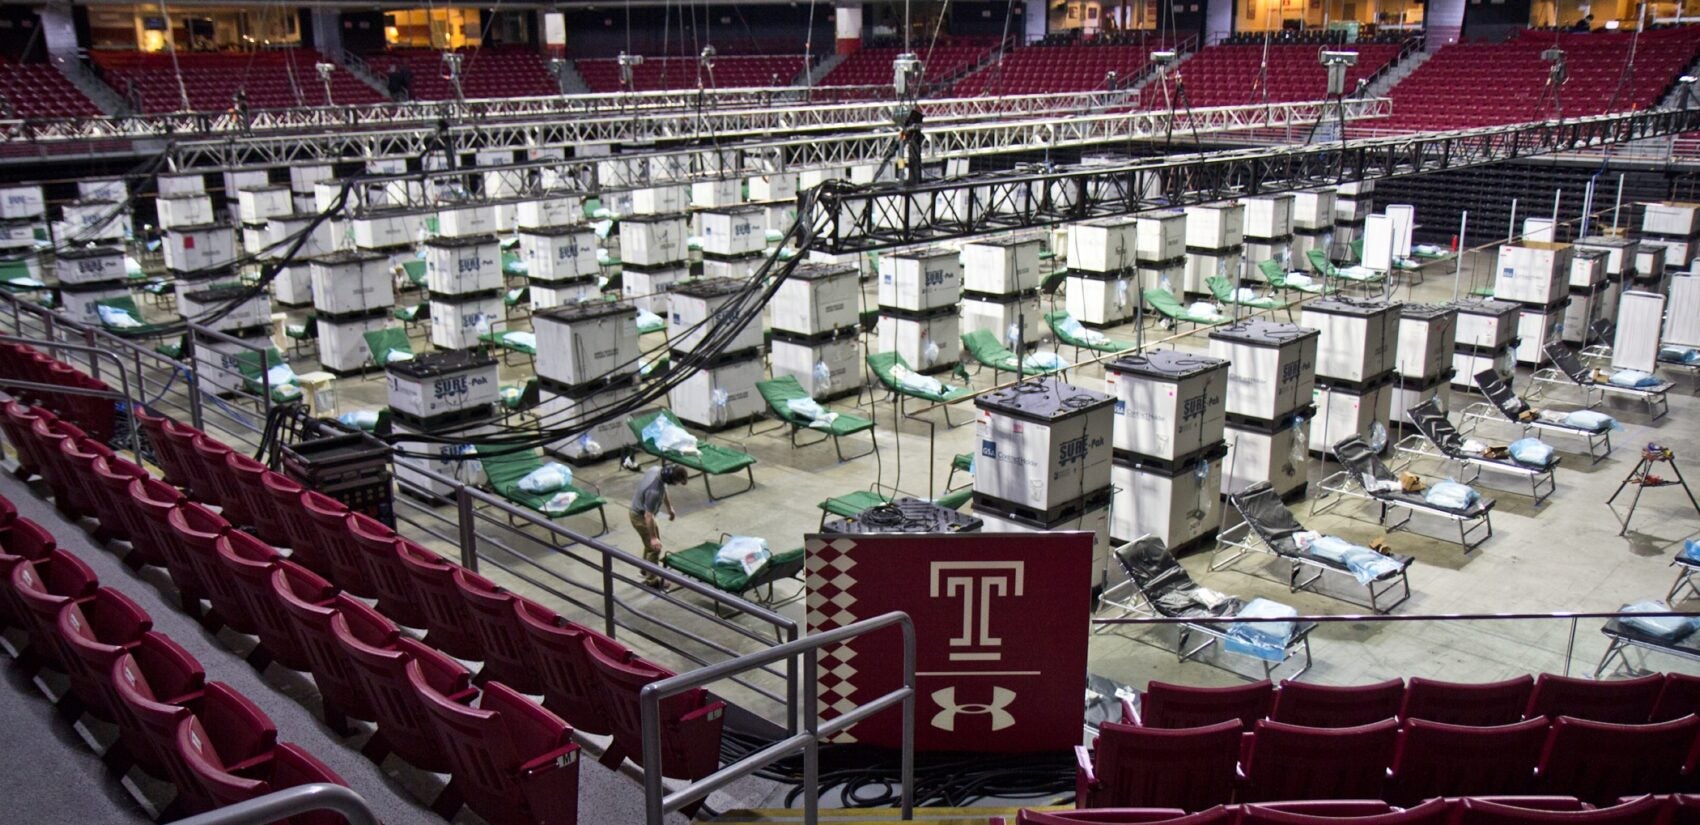 Temple University’s Liacouras Center opens with 180 beds to accommodate an overflow of COVID-19 patients in Philadelphia. (Kimberly Paynter/WHYY)